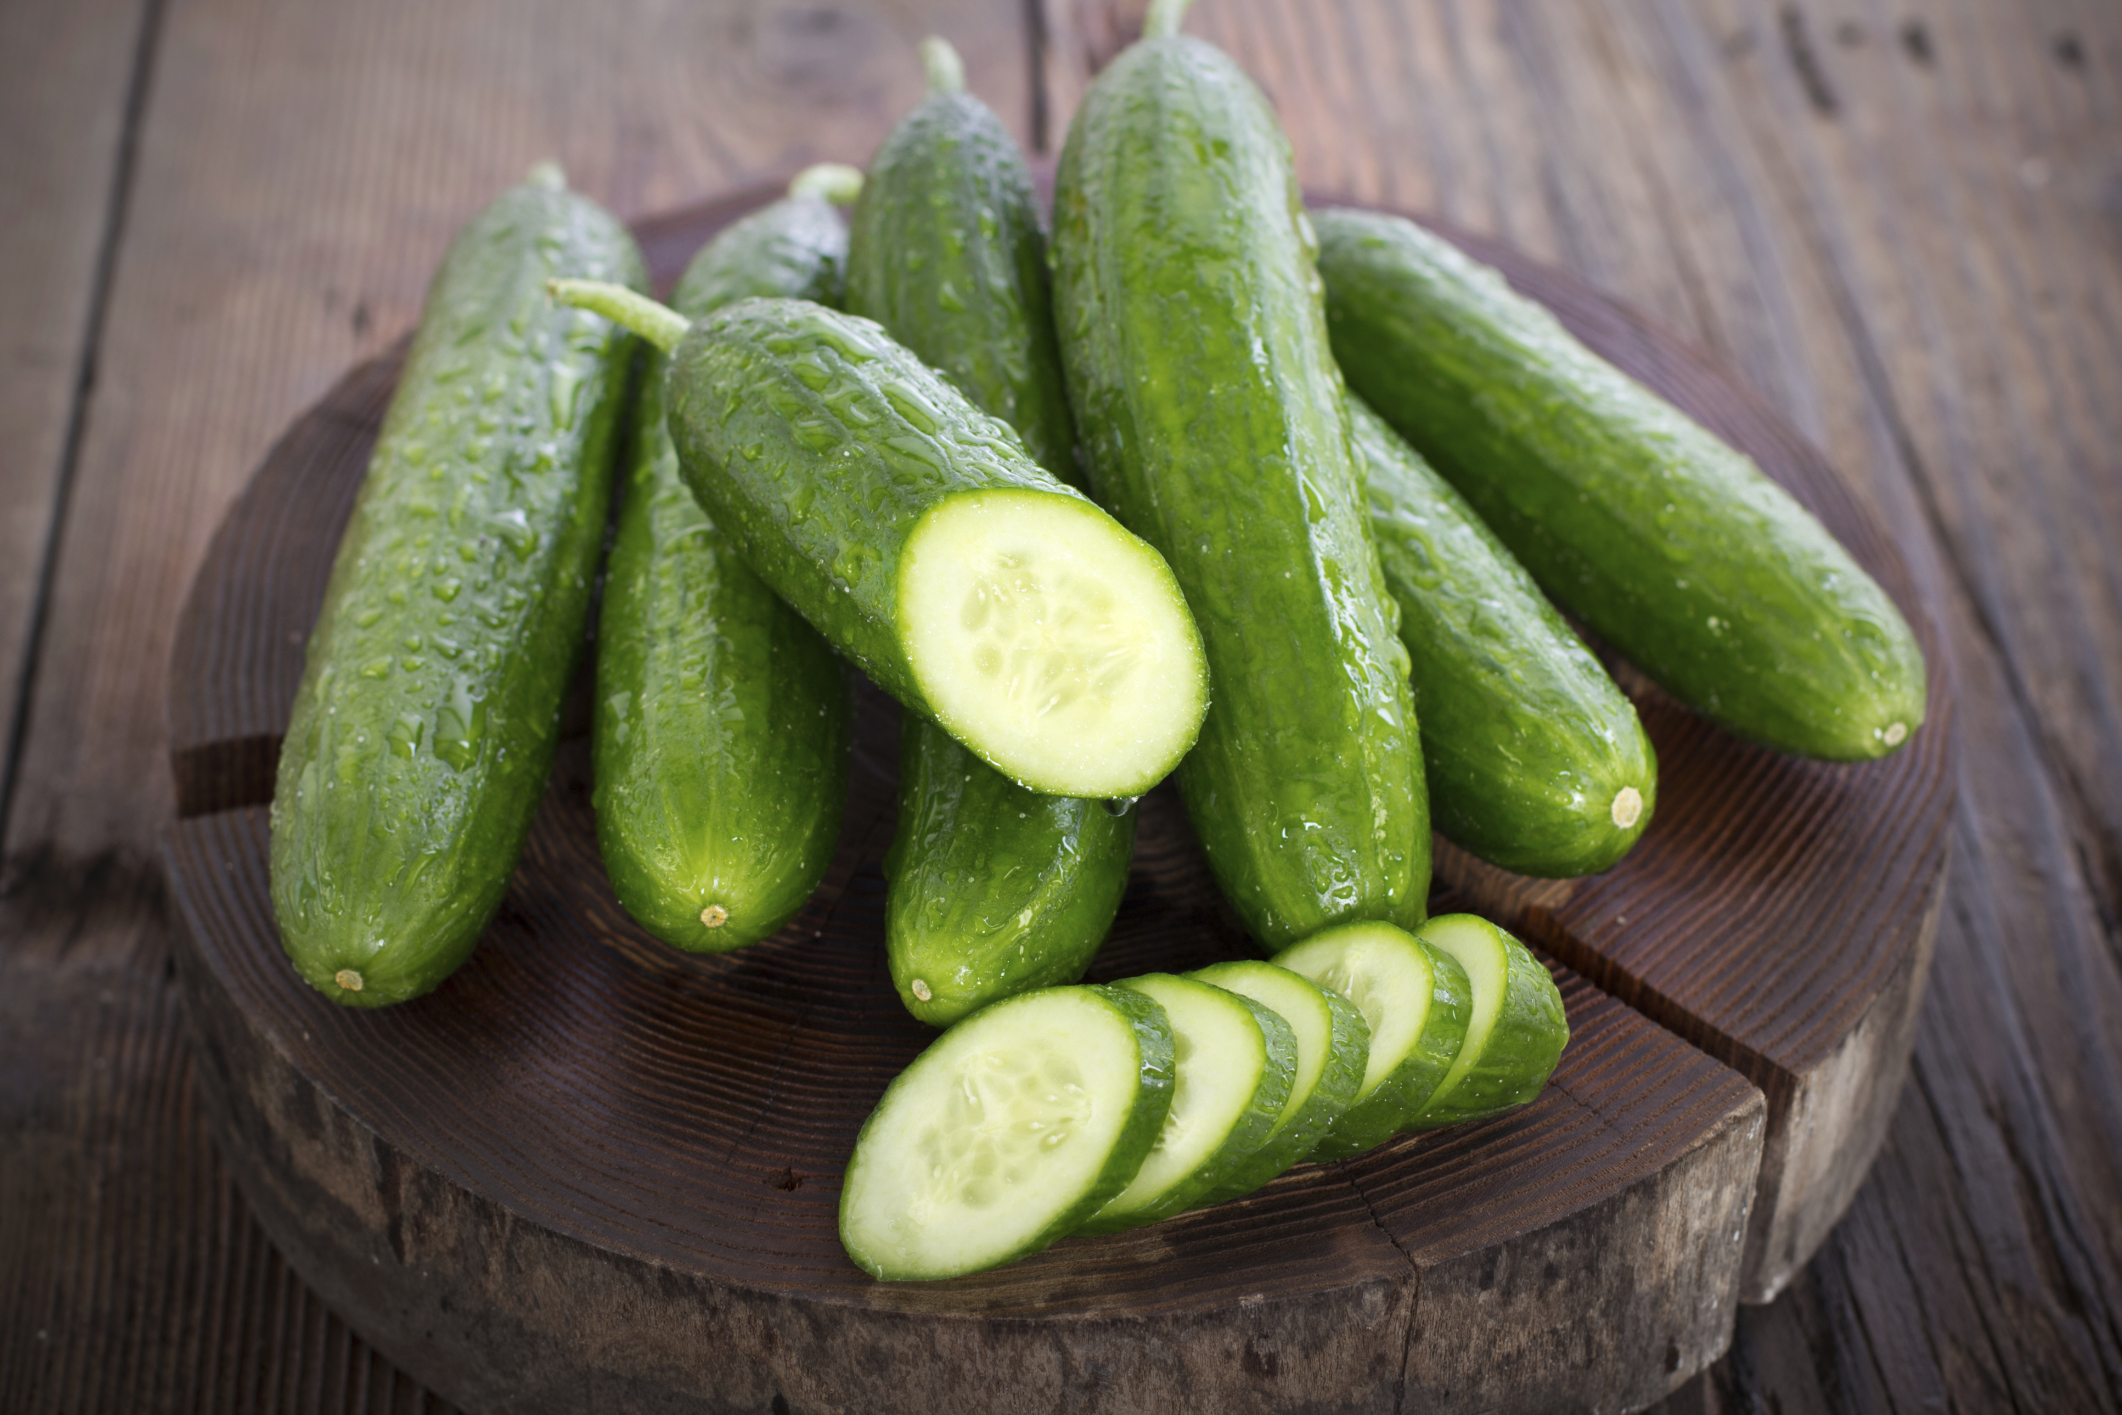 Can You Cook Cucumbers? Here's How to Grill, Bake, and Sauté Them